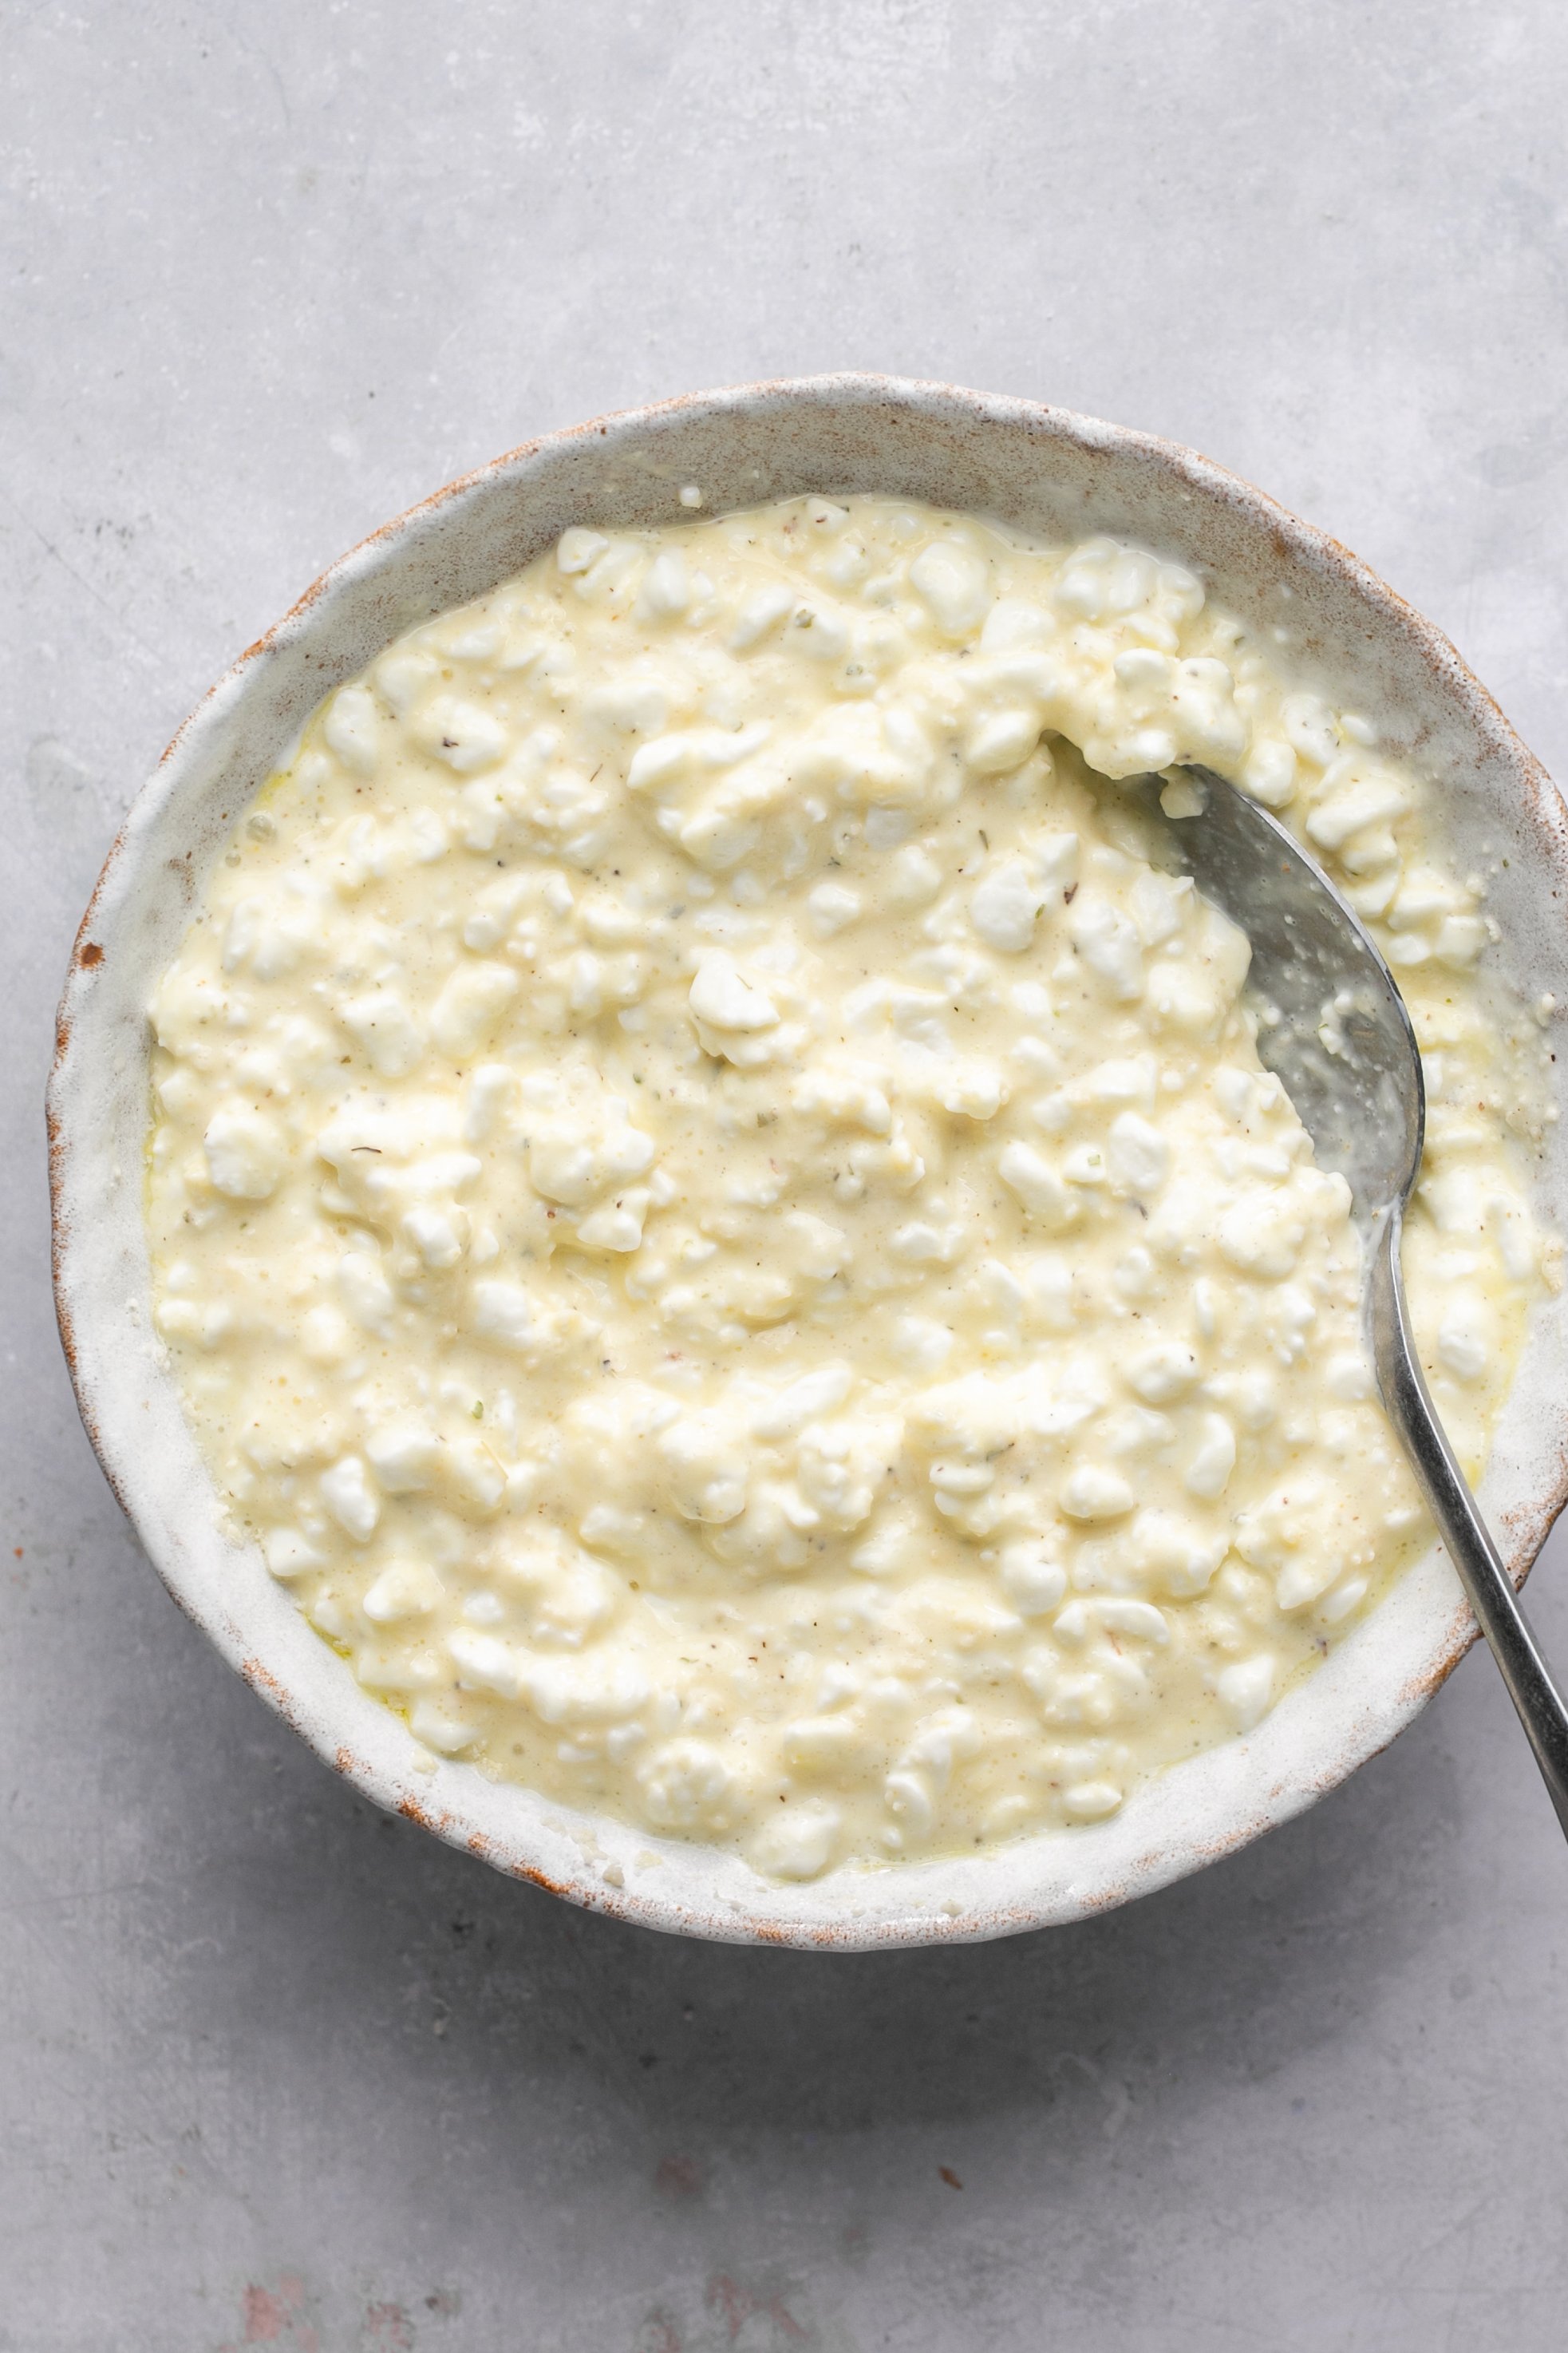 Combined cottage cheese, egg, parmesan cheese, and seasonings in a white bowl sitting on a grey surface. A spoon sitting in the cheese mixture in the bowl.